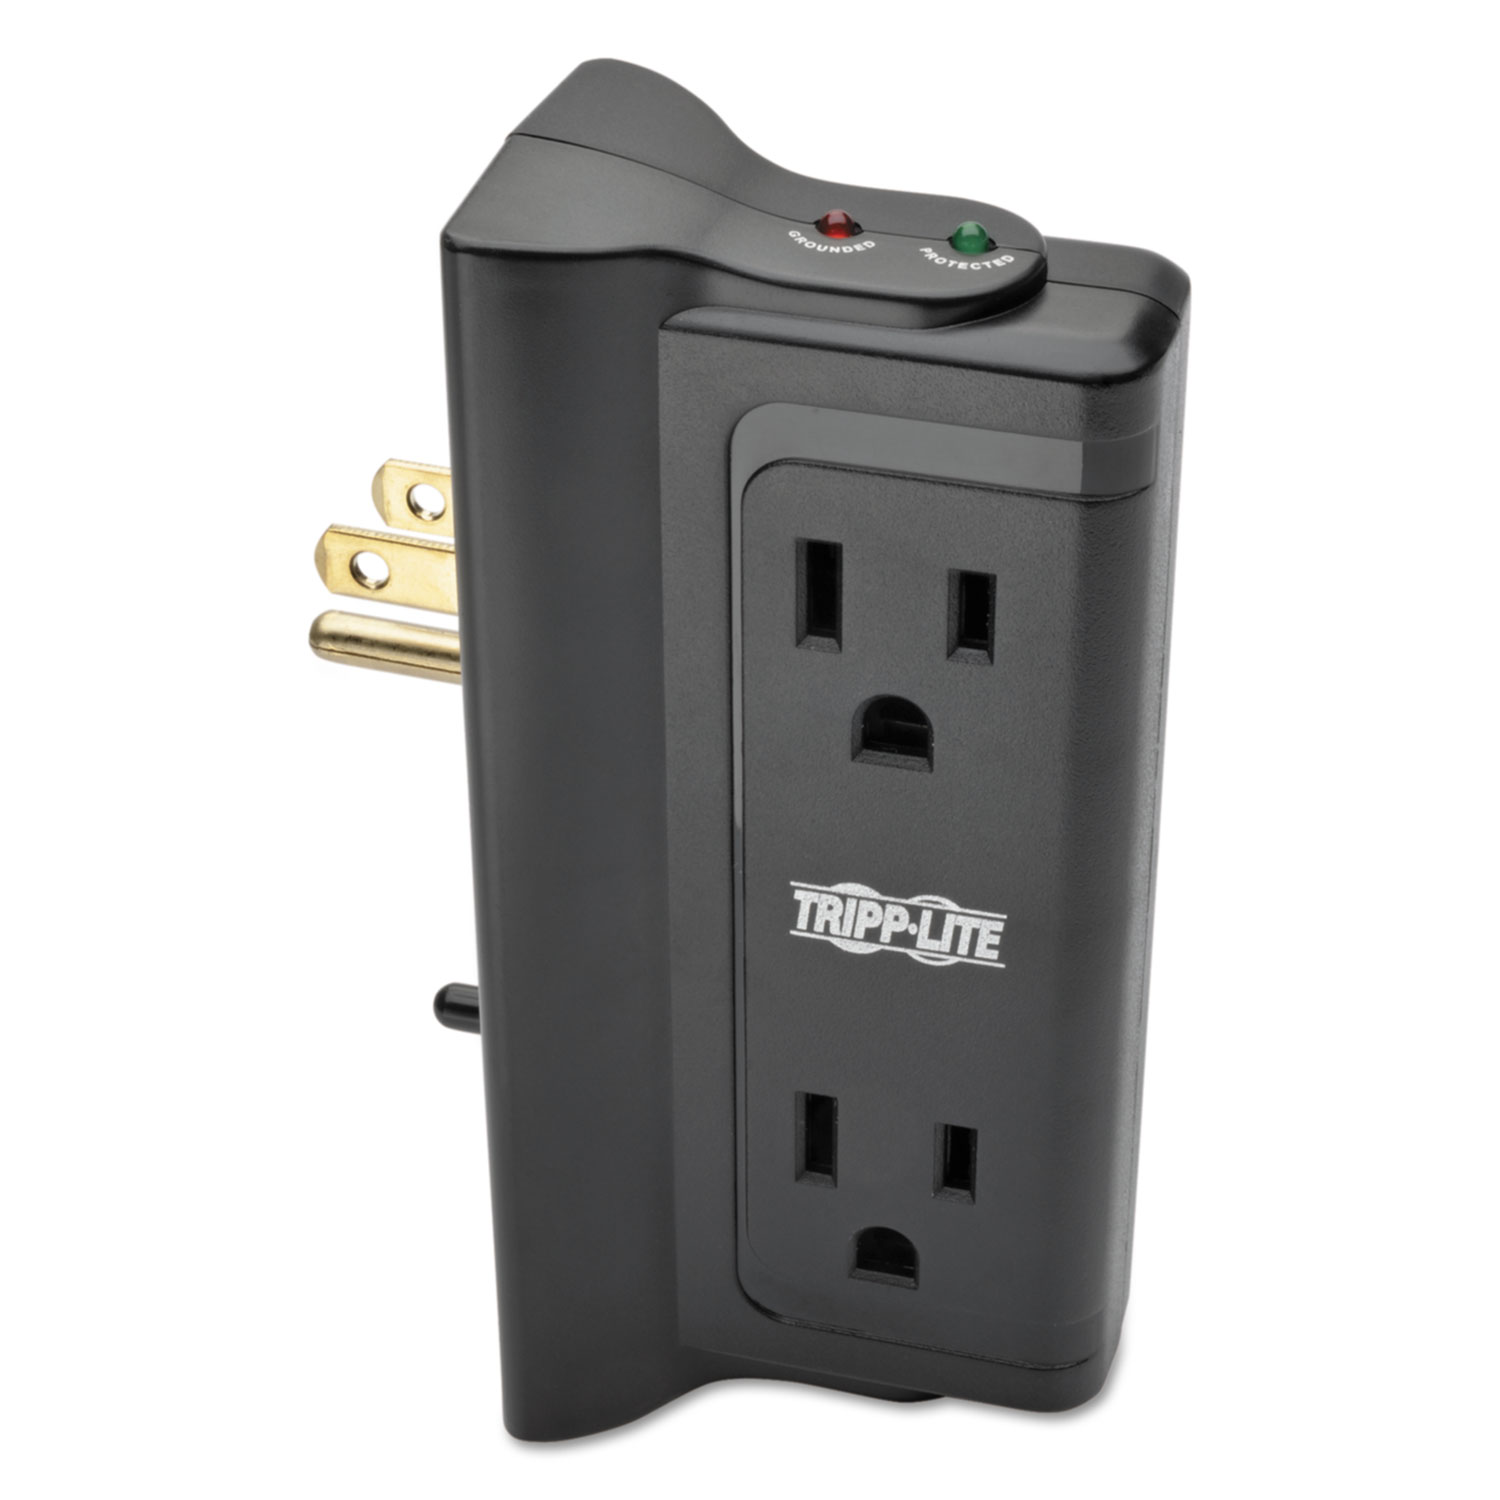 Protect It! Direct Plug-In Surge Suppressor, 4 Outlets, 720 Joules, Black